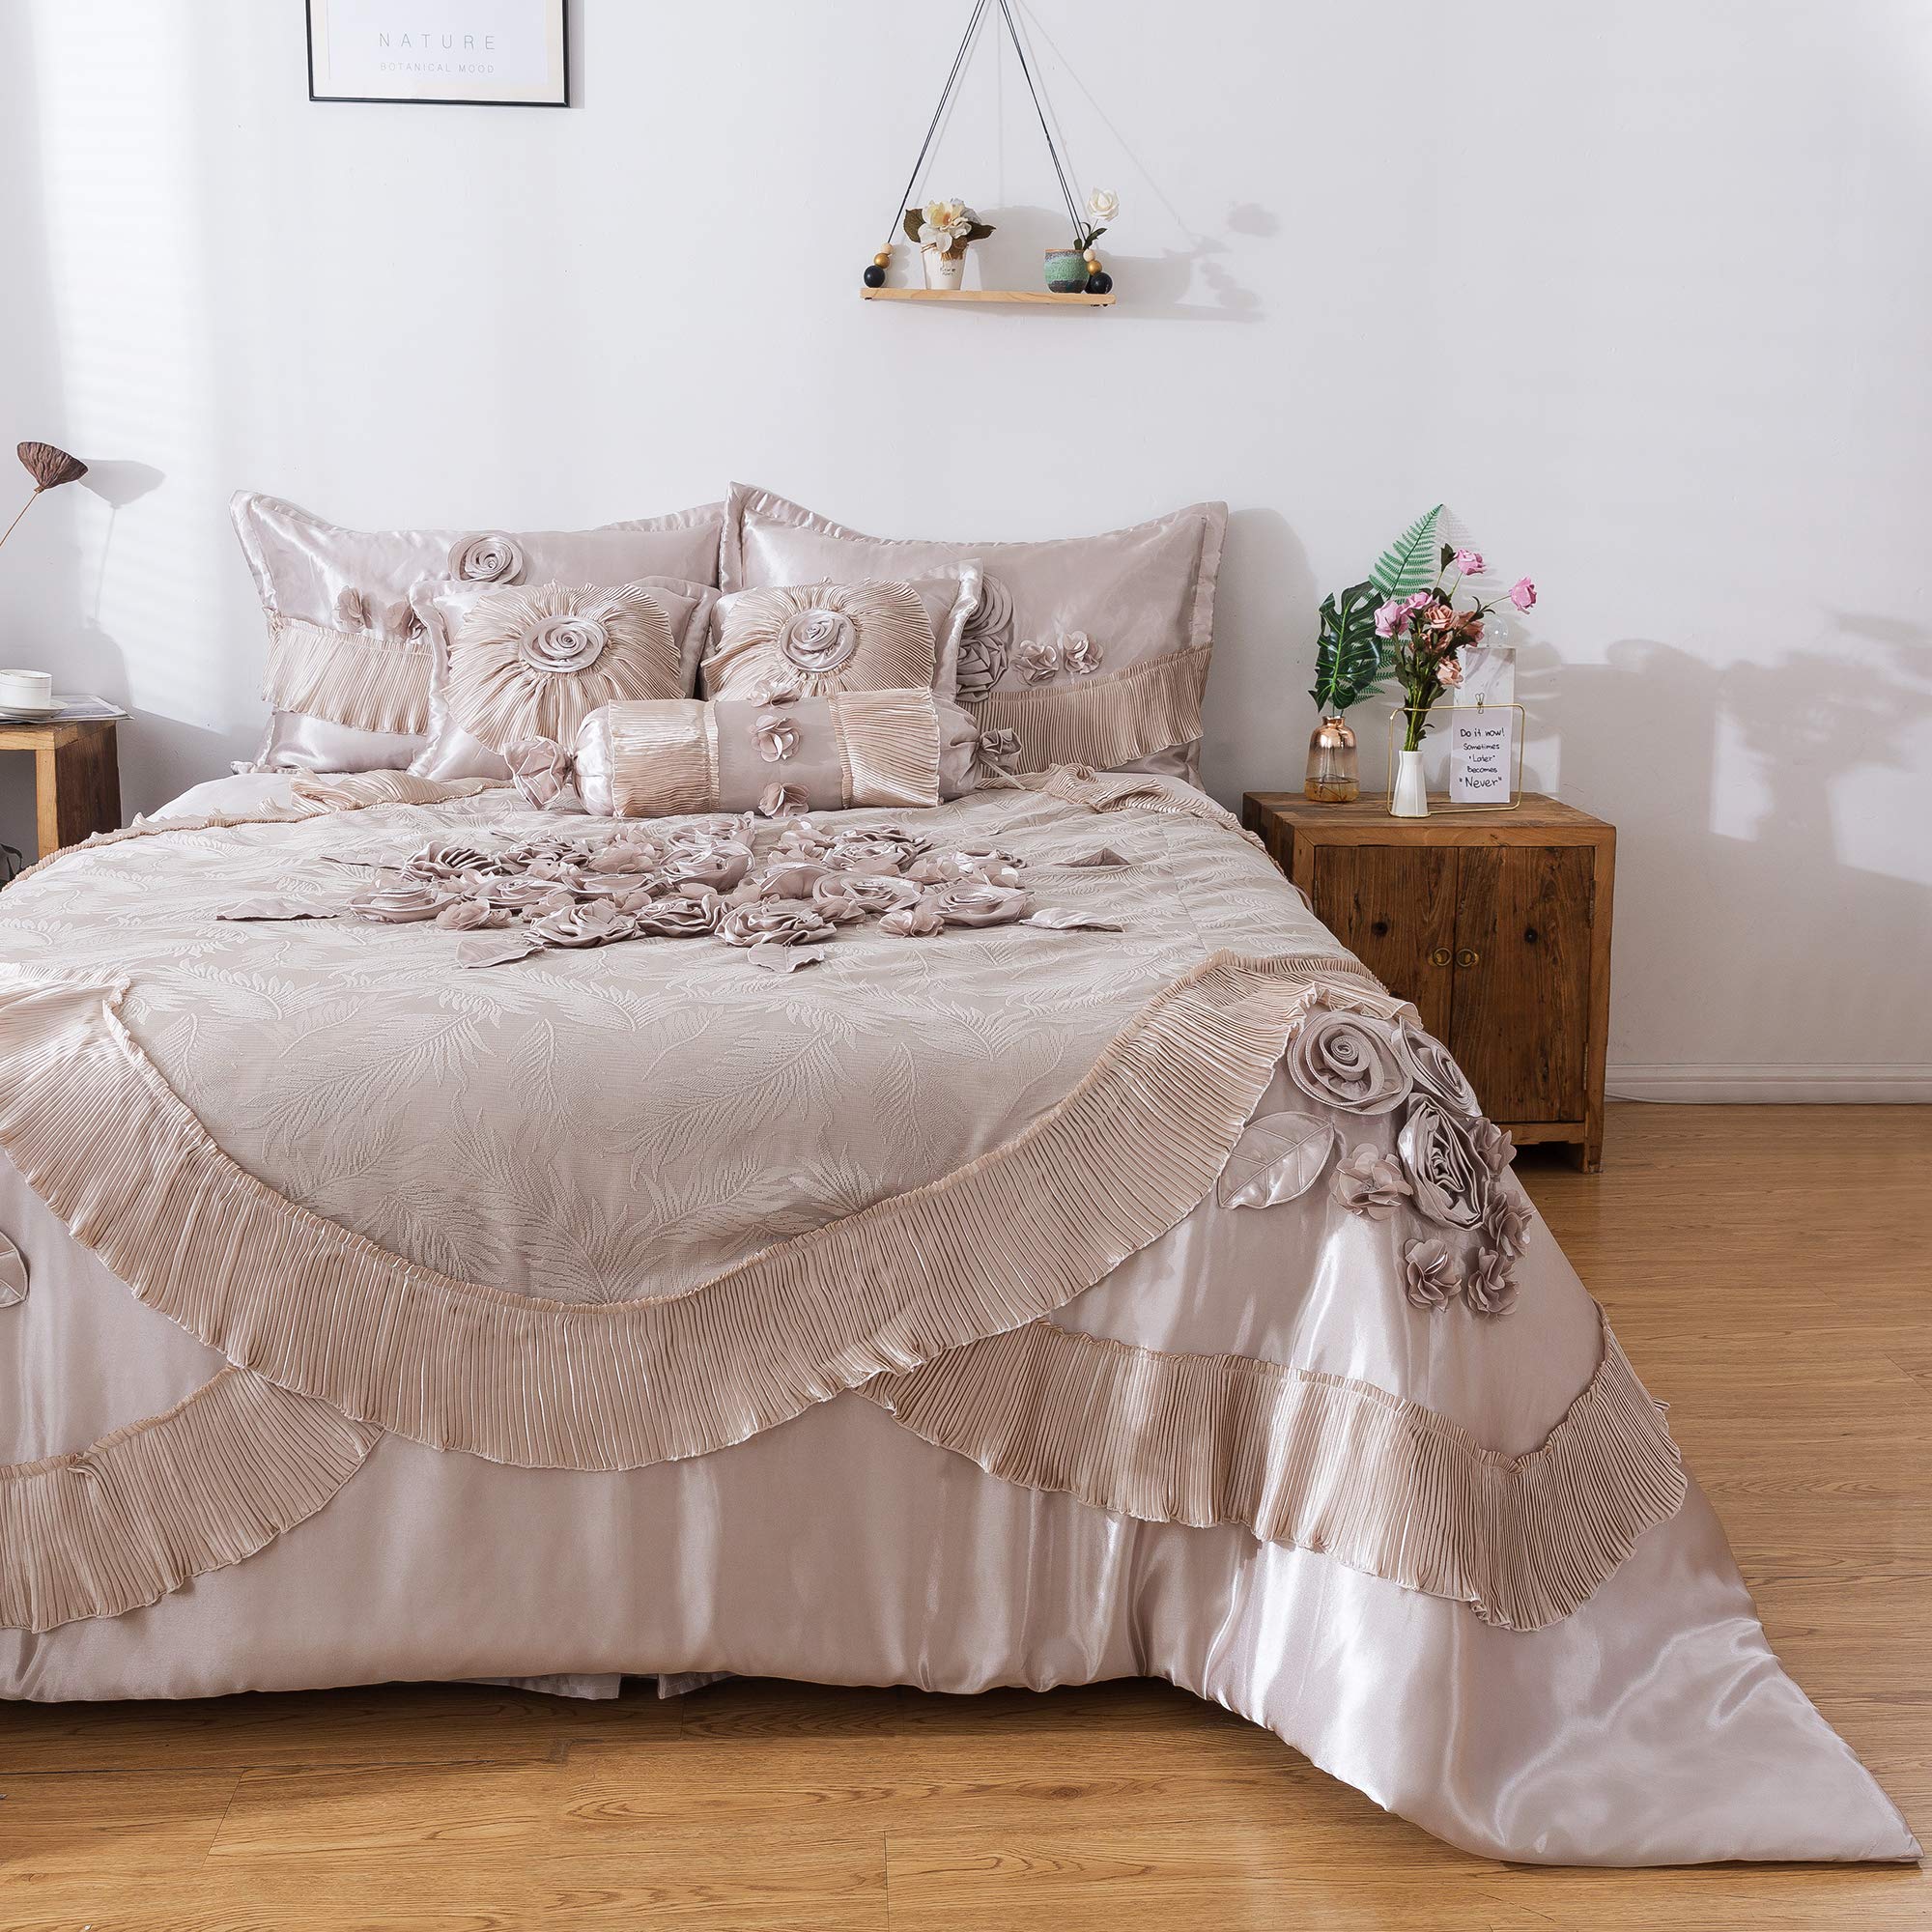 elegant champagne beige satin faux silk comforter set with accessories. click to view all comforters. Tan Ruffled Ruffle Elegant Fancy Luxury Luxurious Bedding Quilt Bedspread Blanket